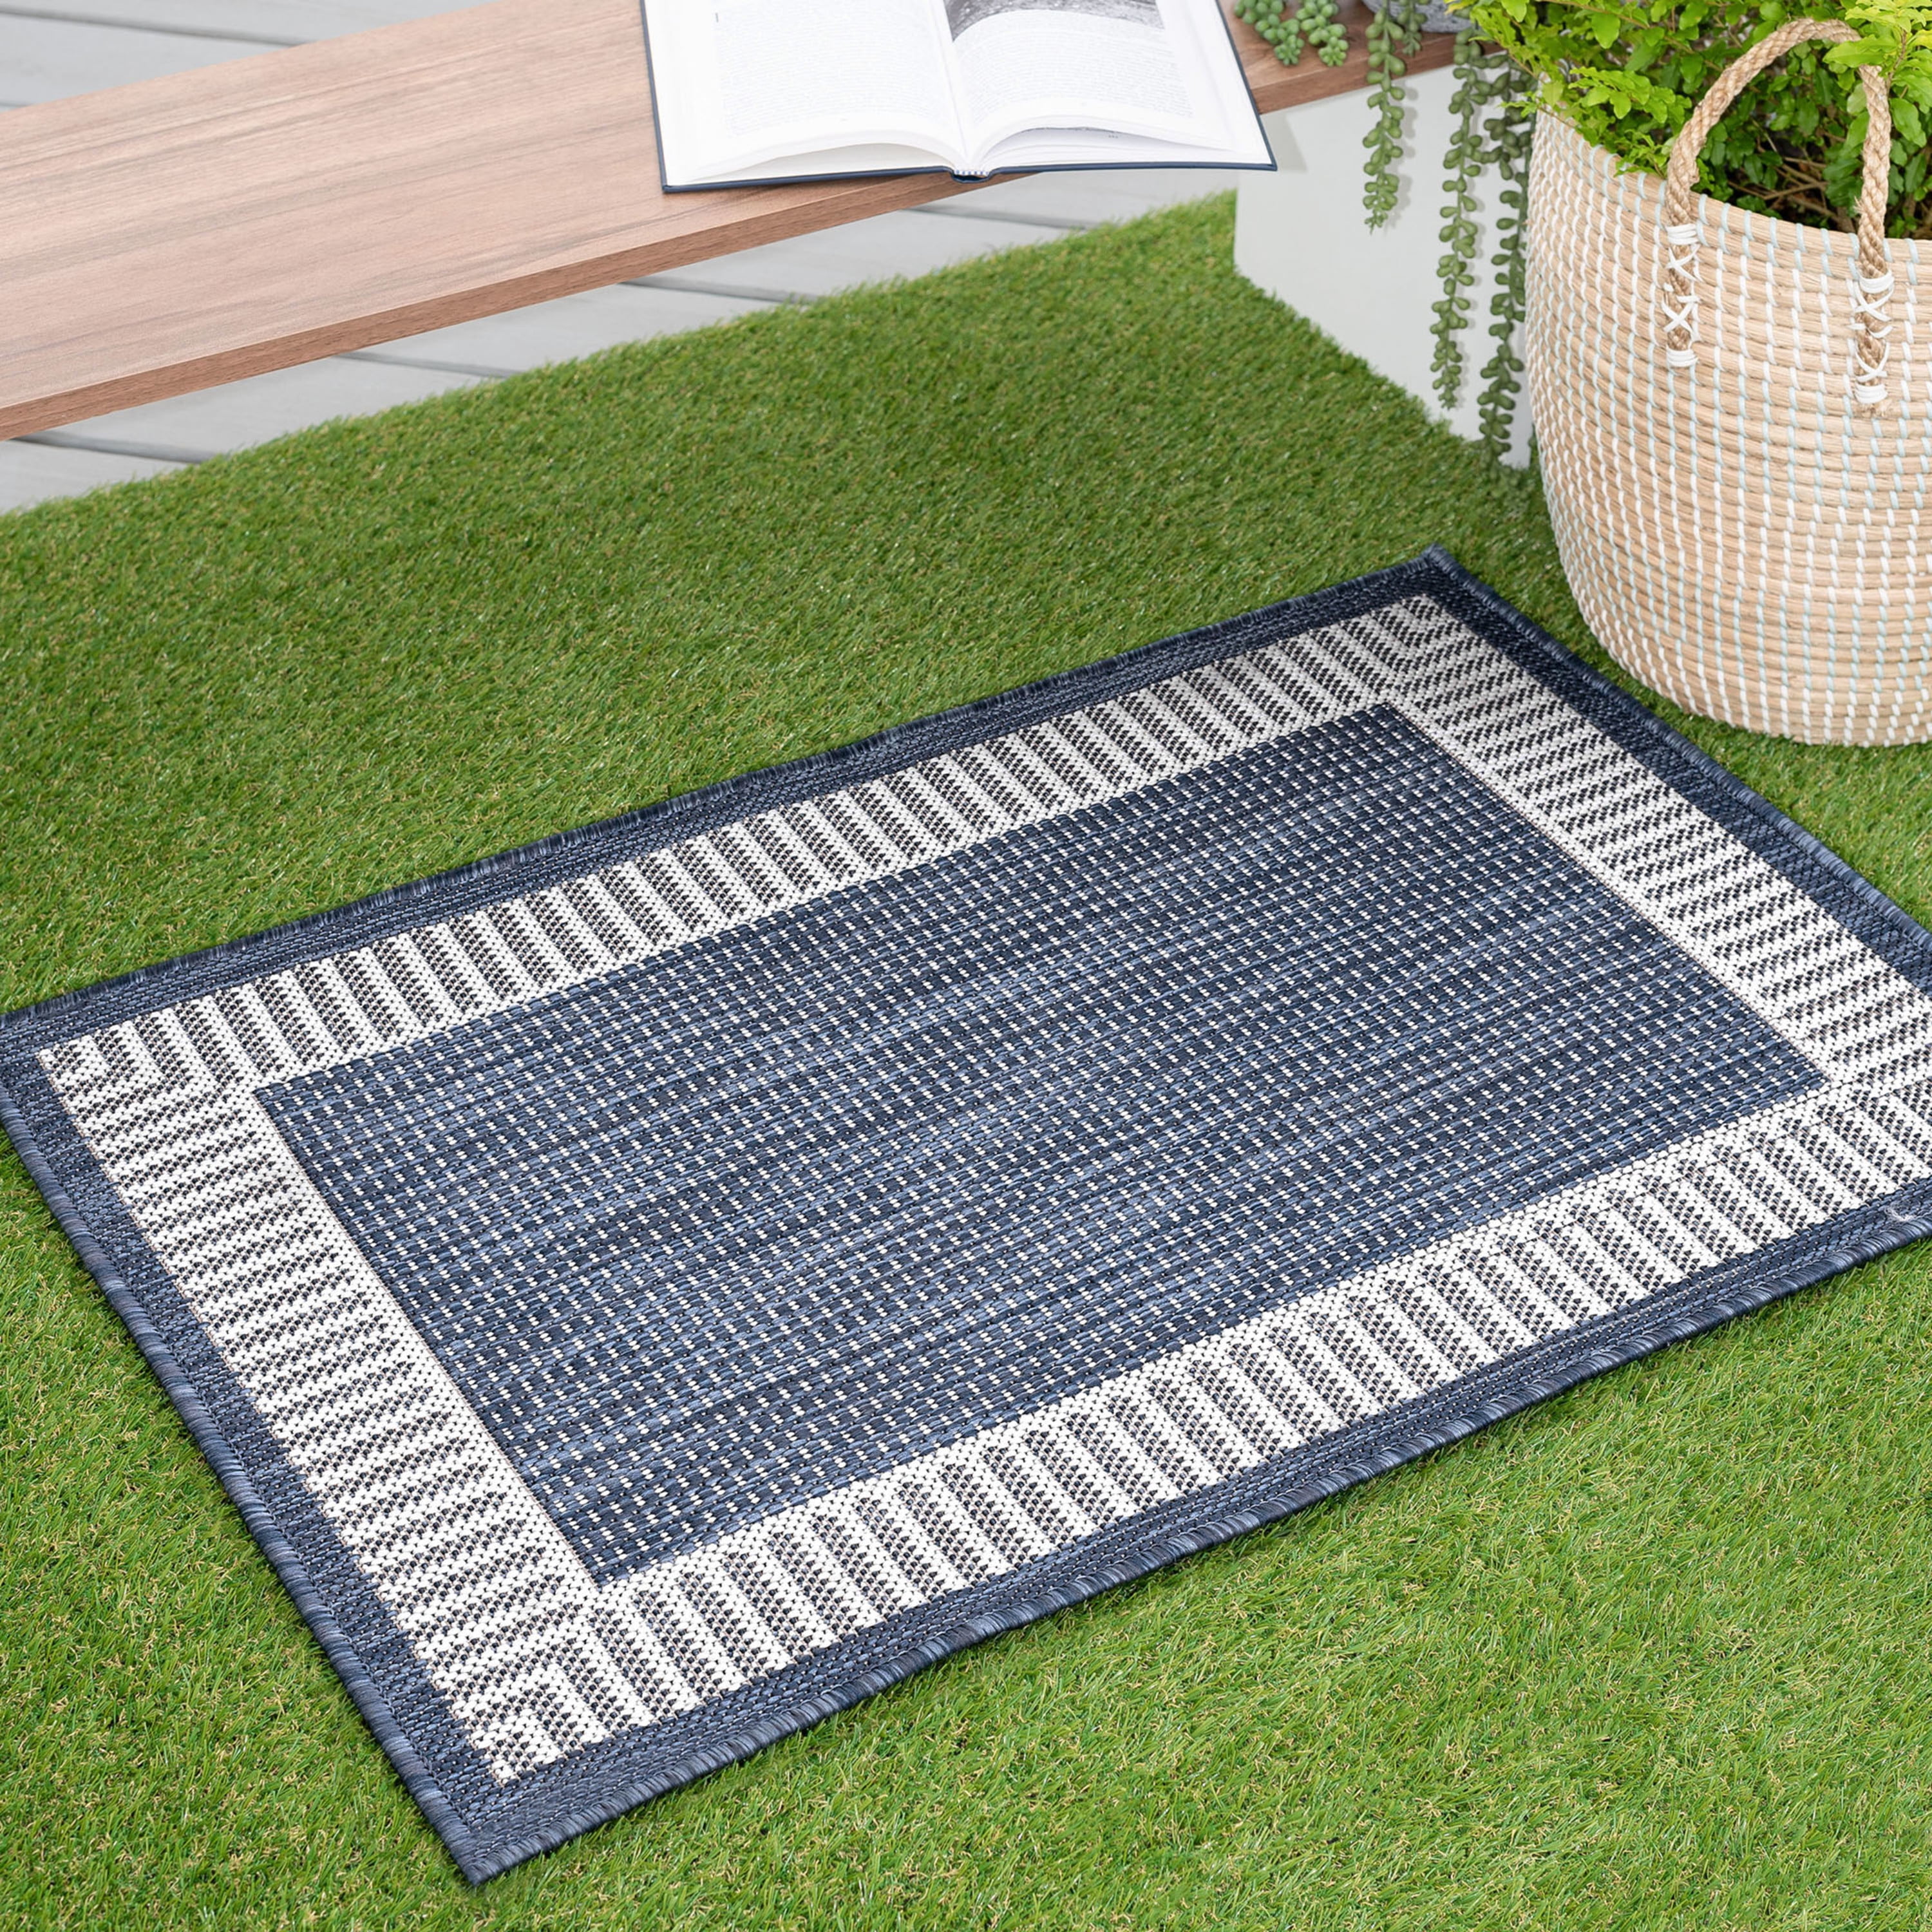 Transitional 2x3 Area Rug 2 X 3, How To Clean Indoor Outdoor Area Rugs